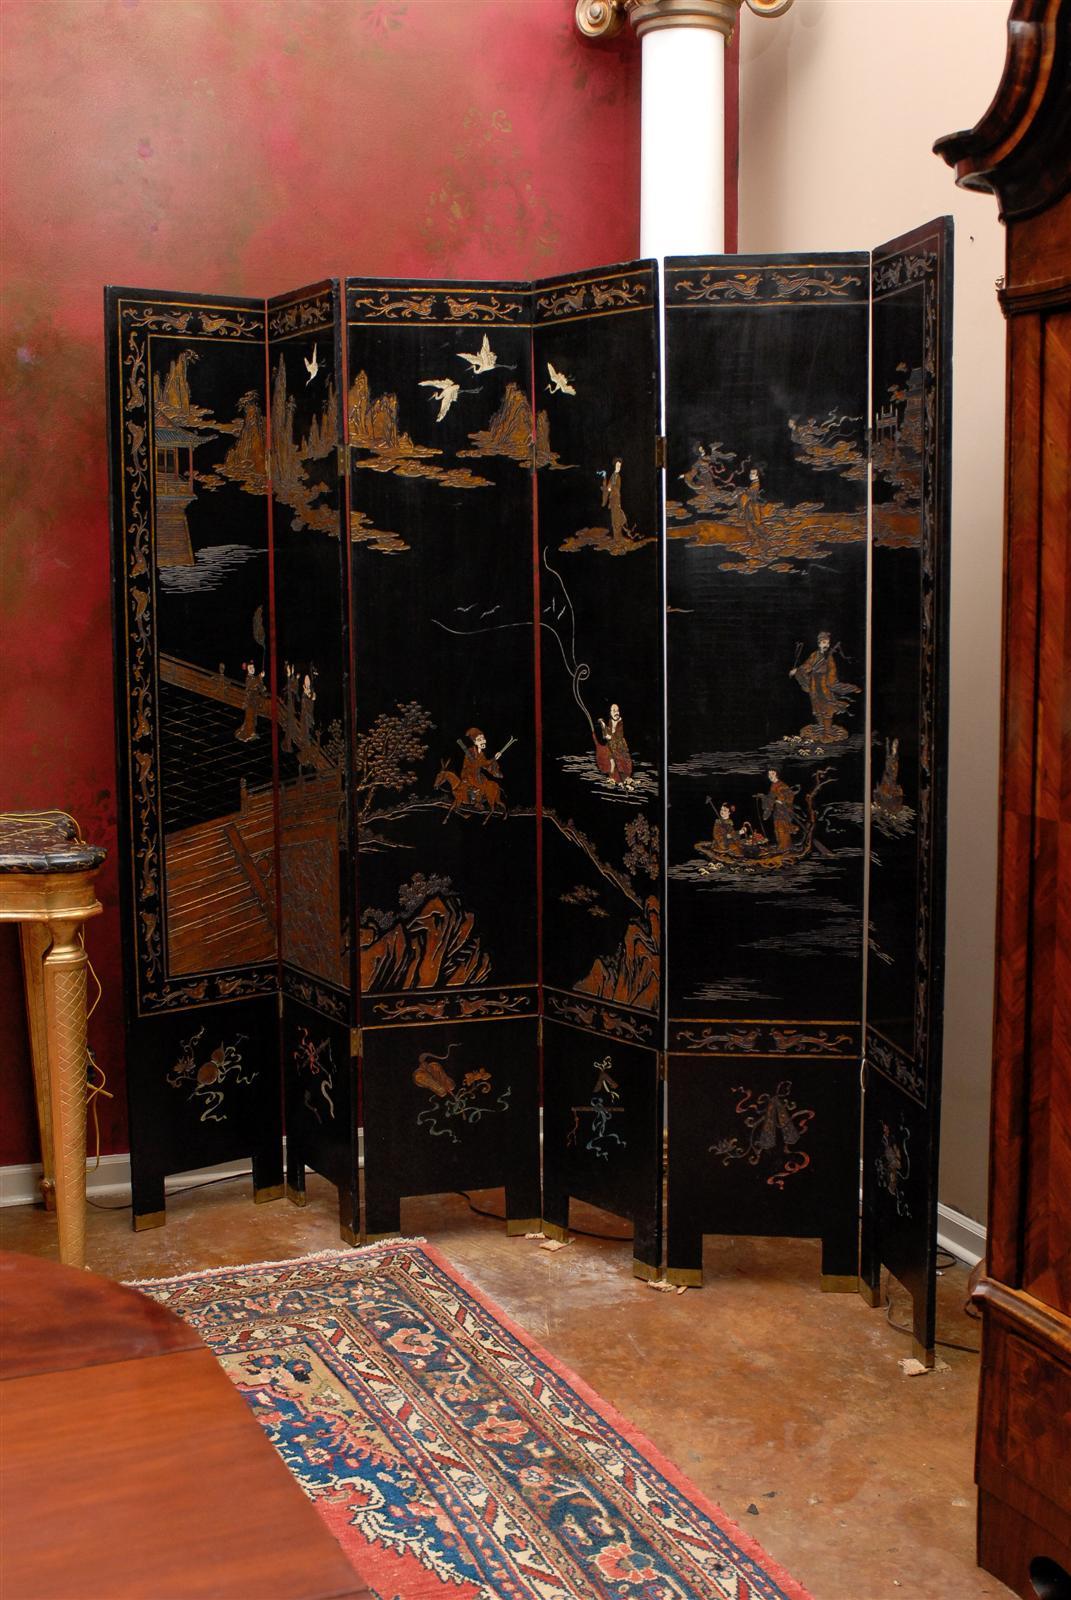 A beautiful double-sided six-panel folding screen. One side is a village scene in golds, ivory and orange with a black background. The opposite side has flower and bird patterns. Each panel is 16 inches.